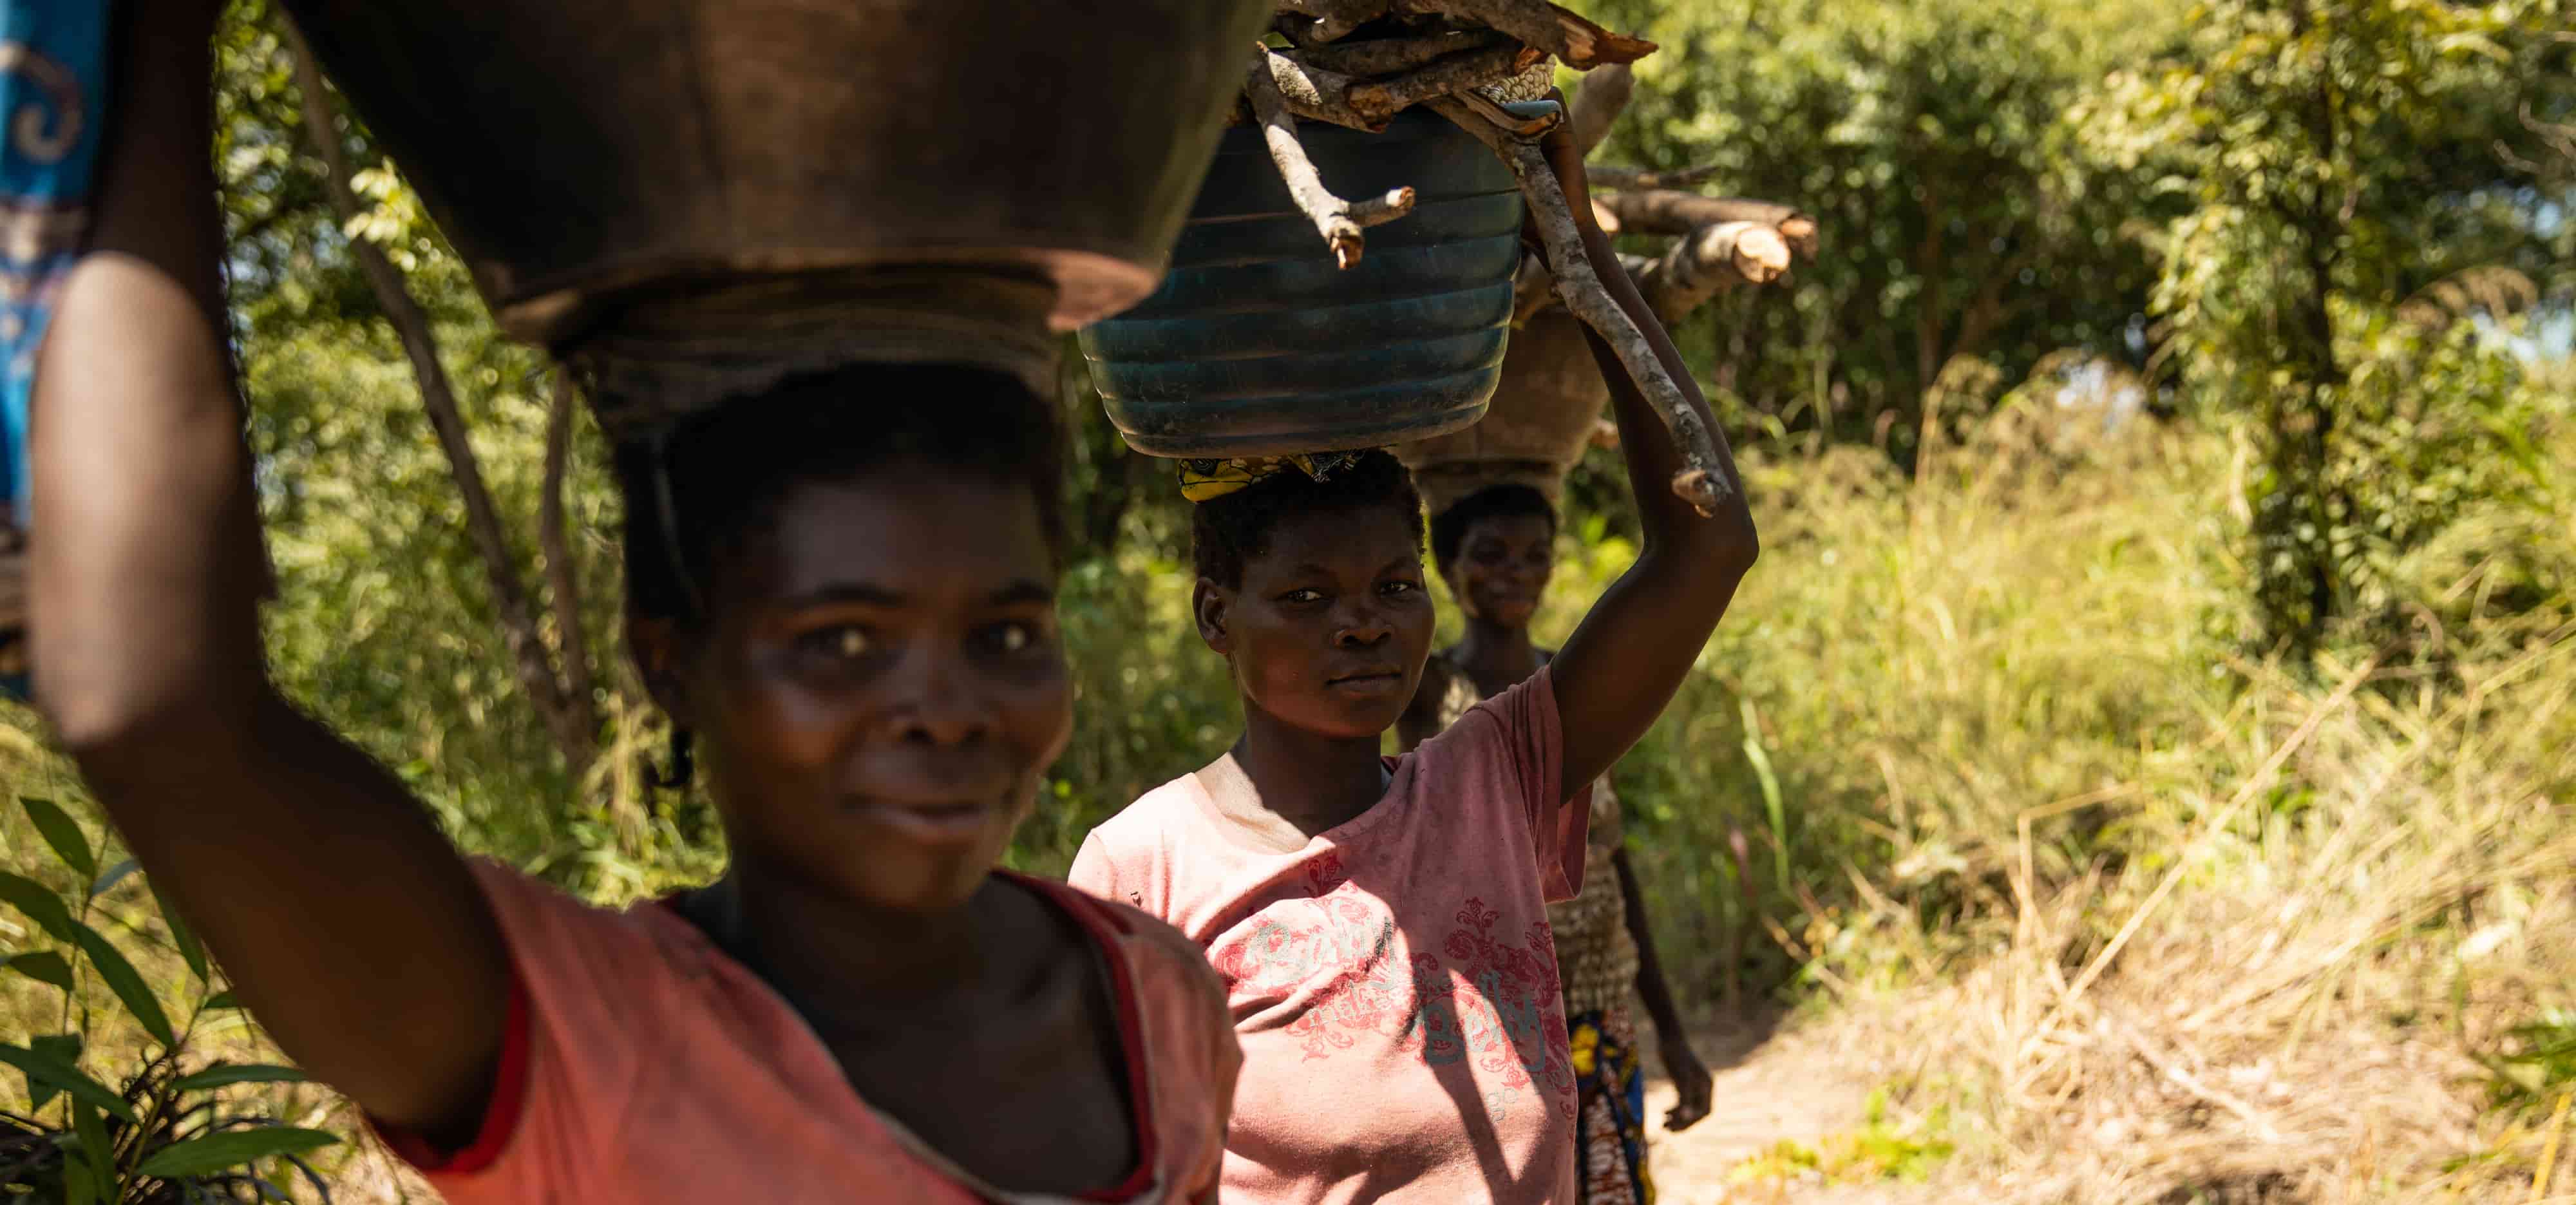 Women carrying baskets of vegetables and firewood.